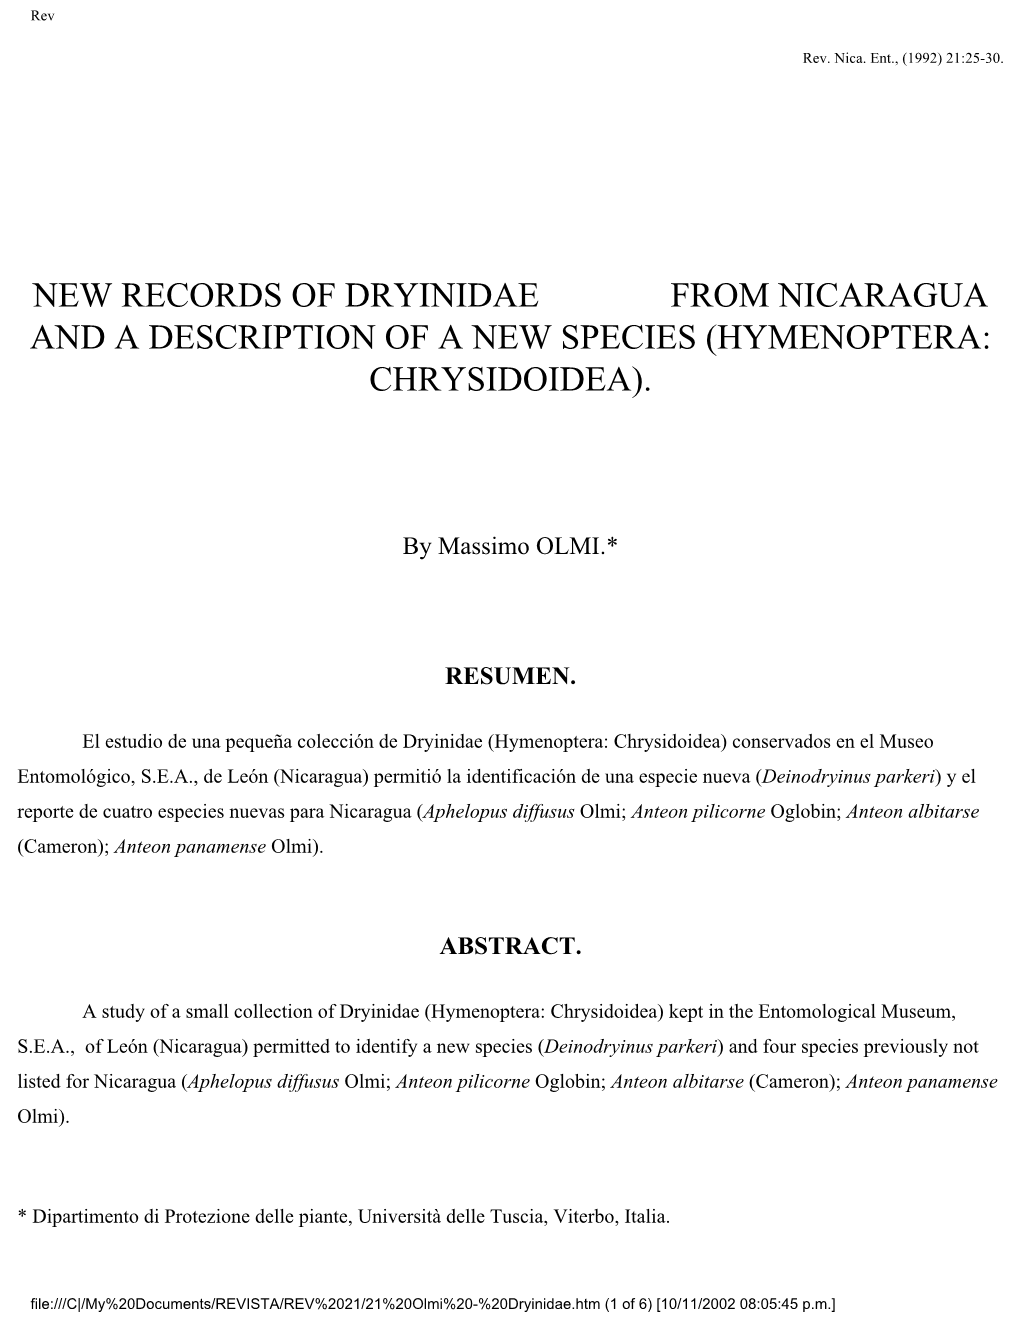 New Records of Dryinidae from Nicaragua and a Description of a New Species (Hymenoptera: Chrysidoidea)